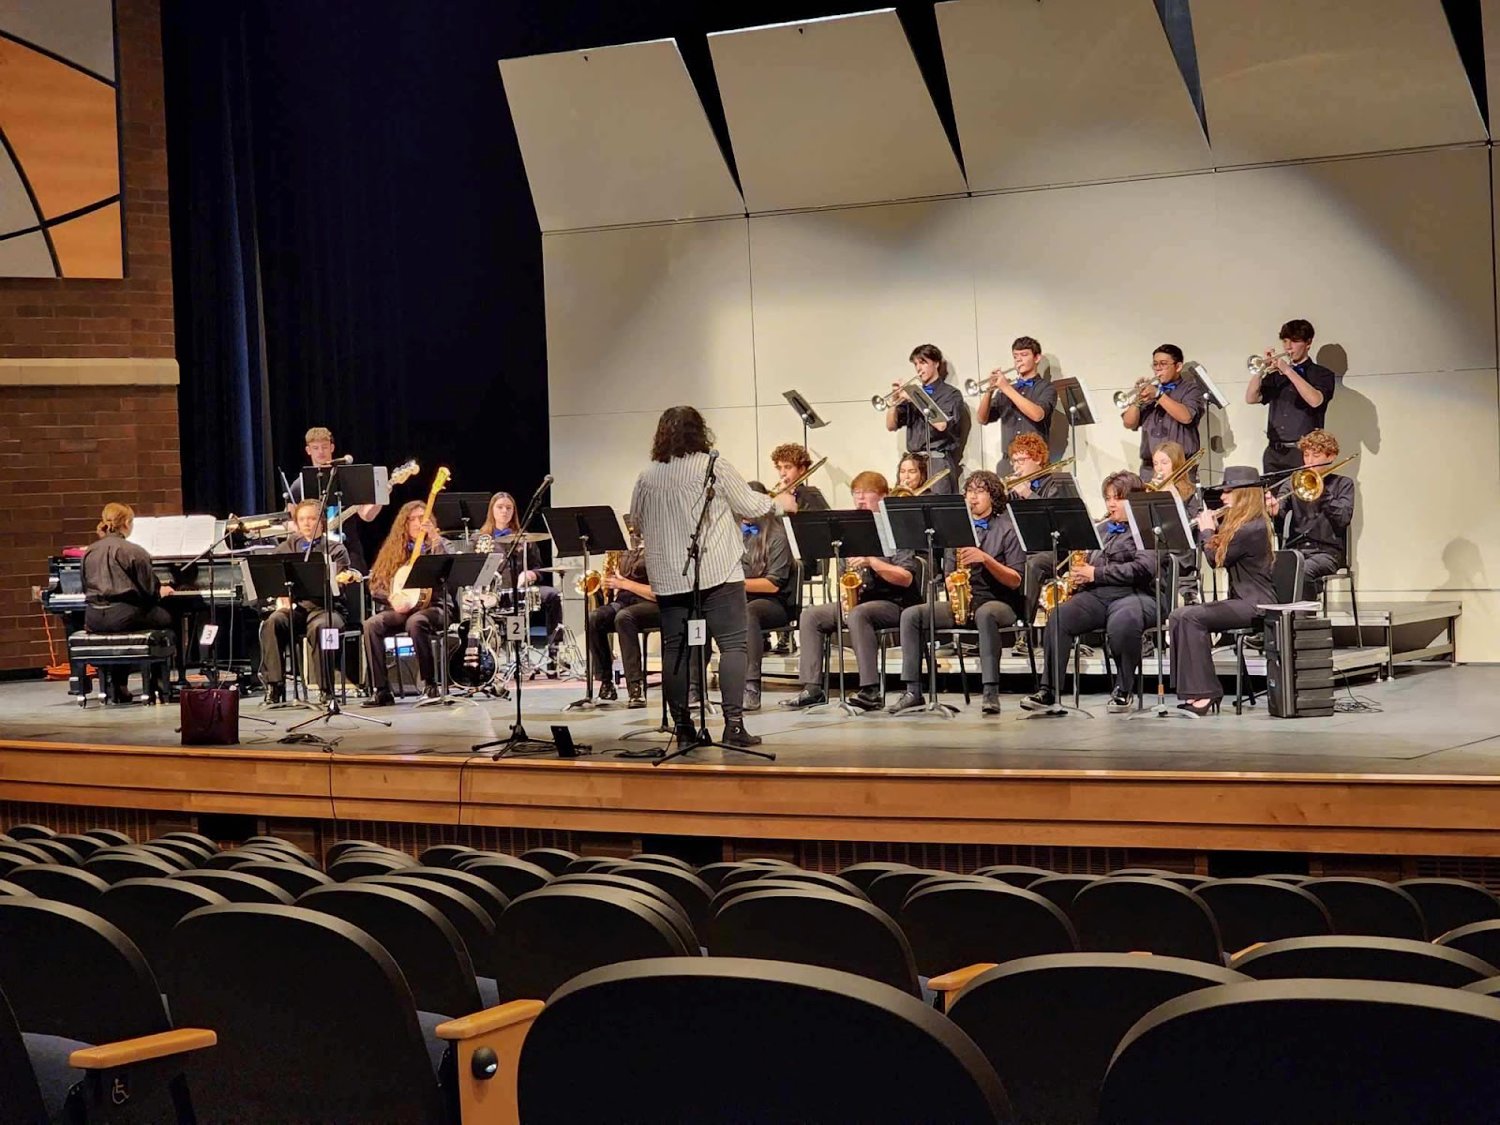 The West Liberty High School Jazz Band placed first in Class 2A at the Southeast Iowa Bandmasters Association district jazz band festival March 4.